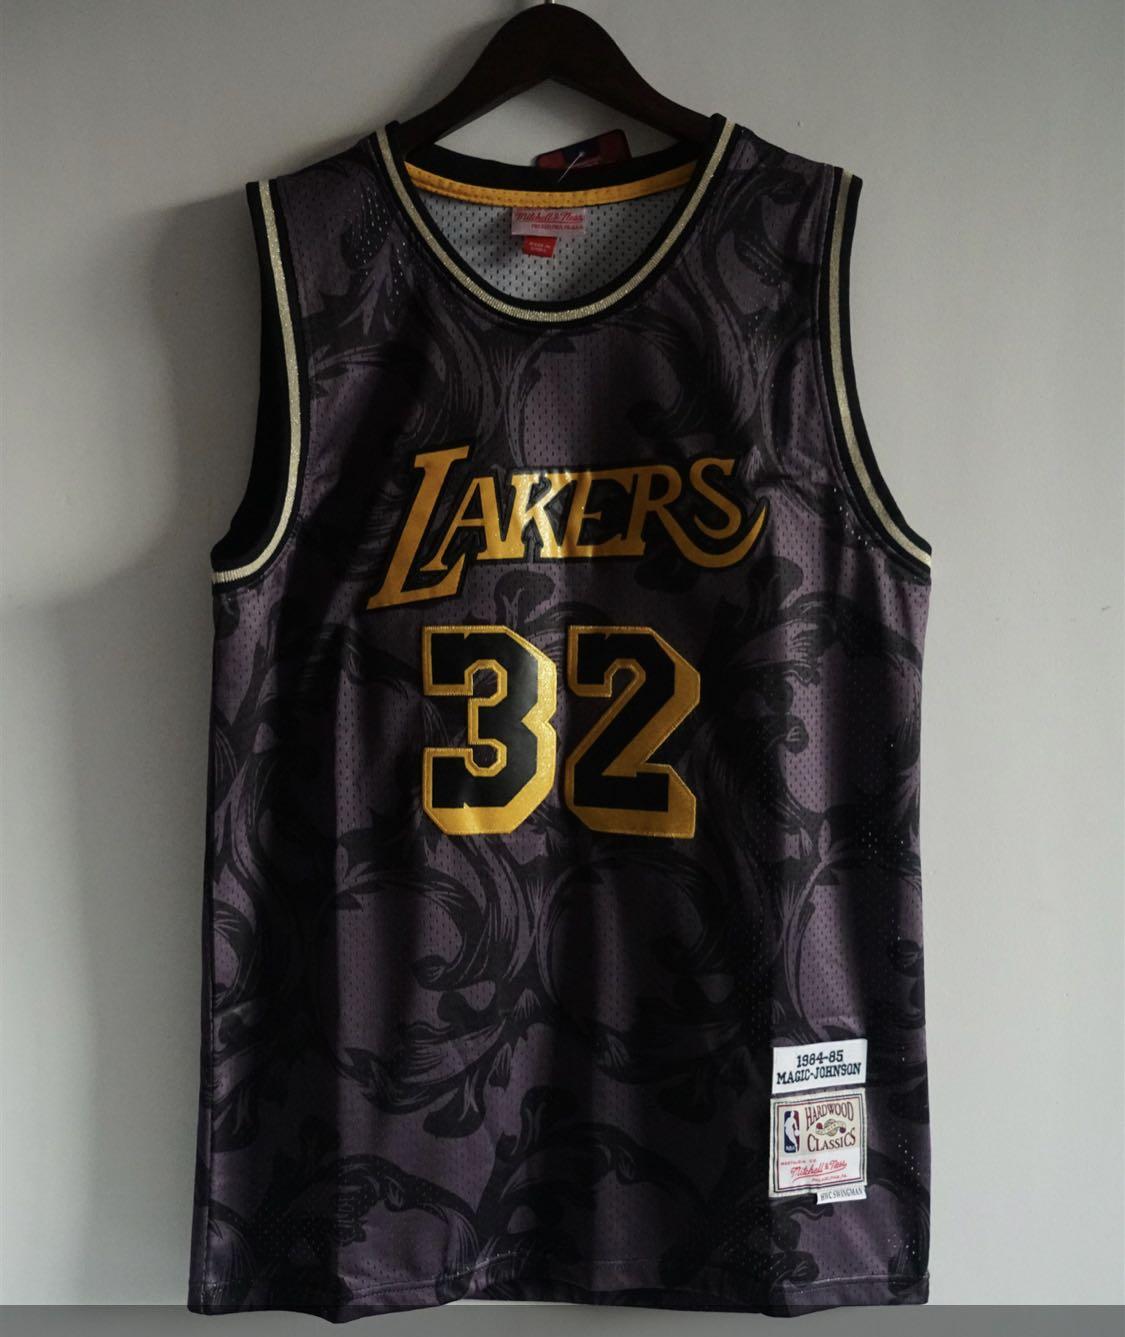 black jersey lakers Off 60% - www.bashhguidelines.org